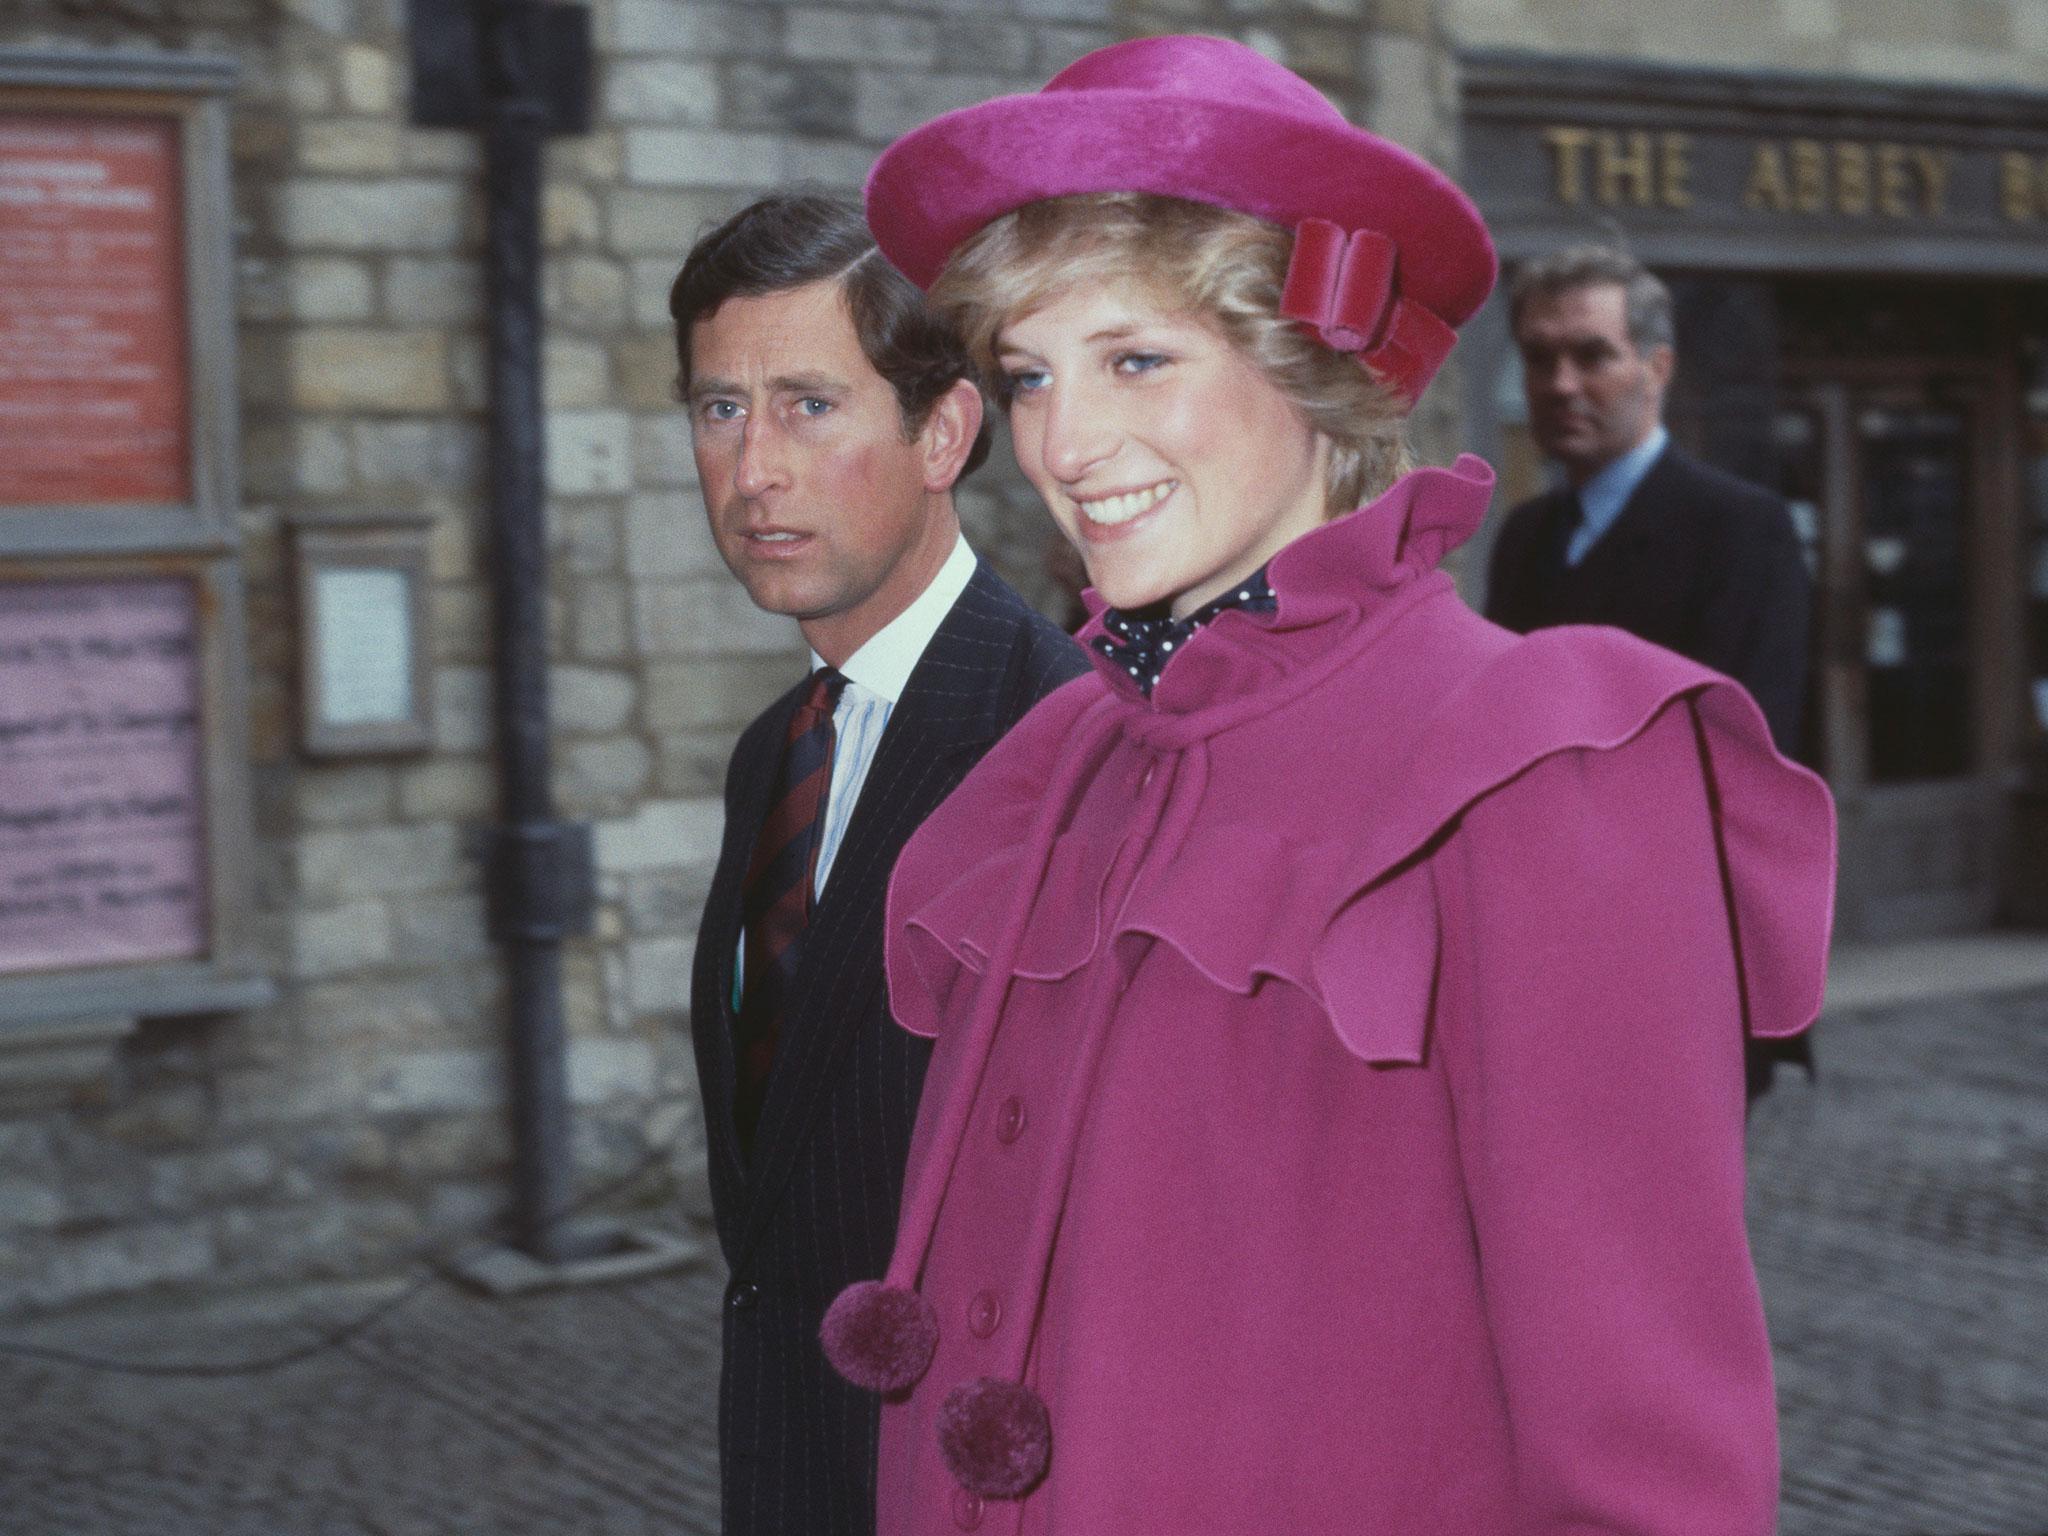 Queen Elizabeth told Diana Charles is hopeless when confronted about her marriage The Independent The Independent pic